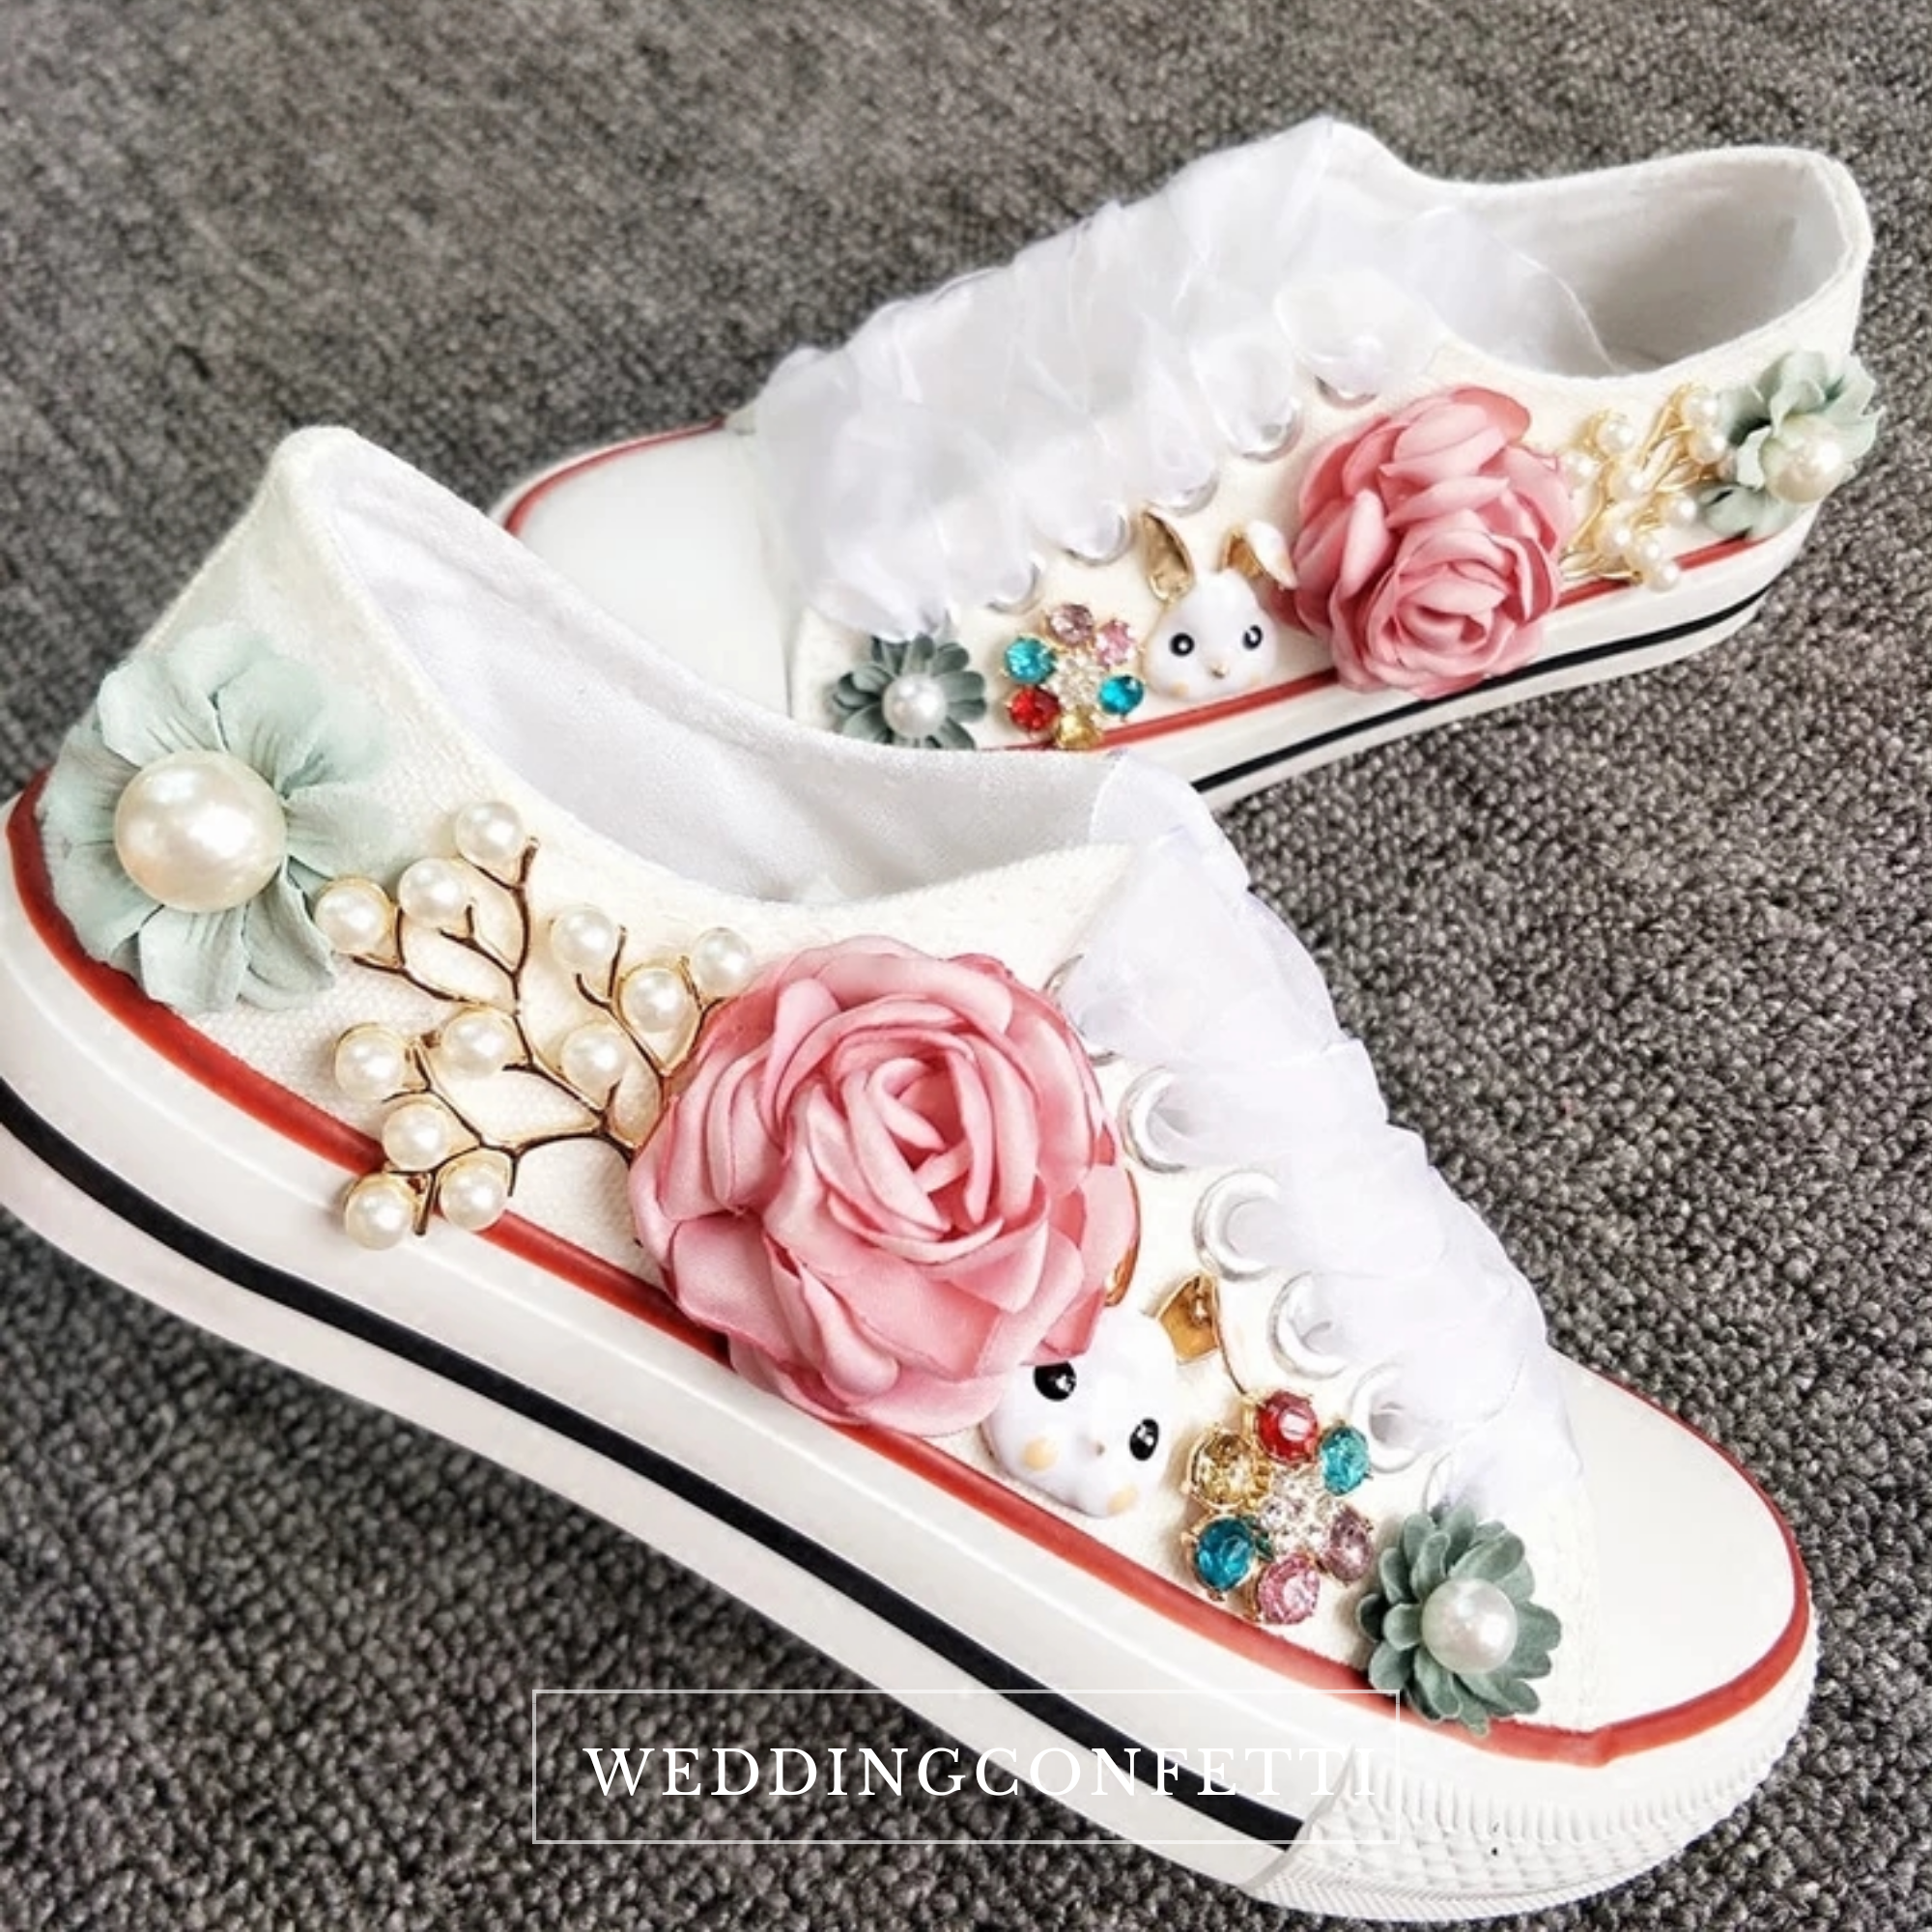 sneakers with floral design